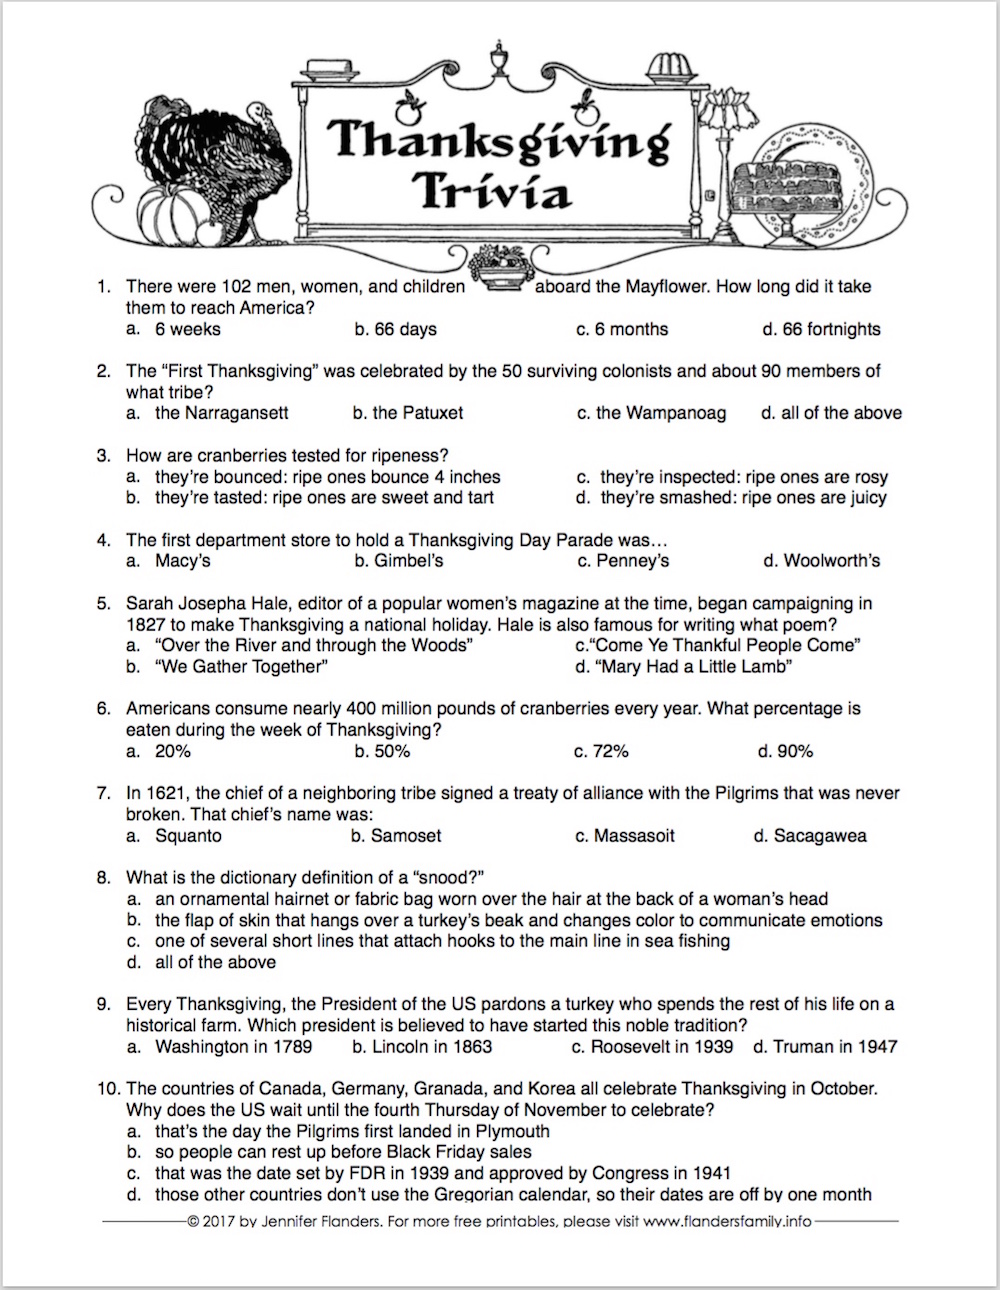 Free printable Thanksgiving Trivia Quiz  -- challenge your family and friends!